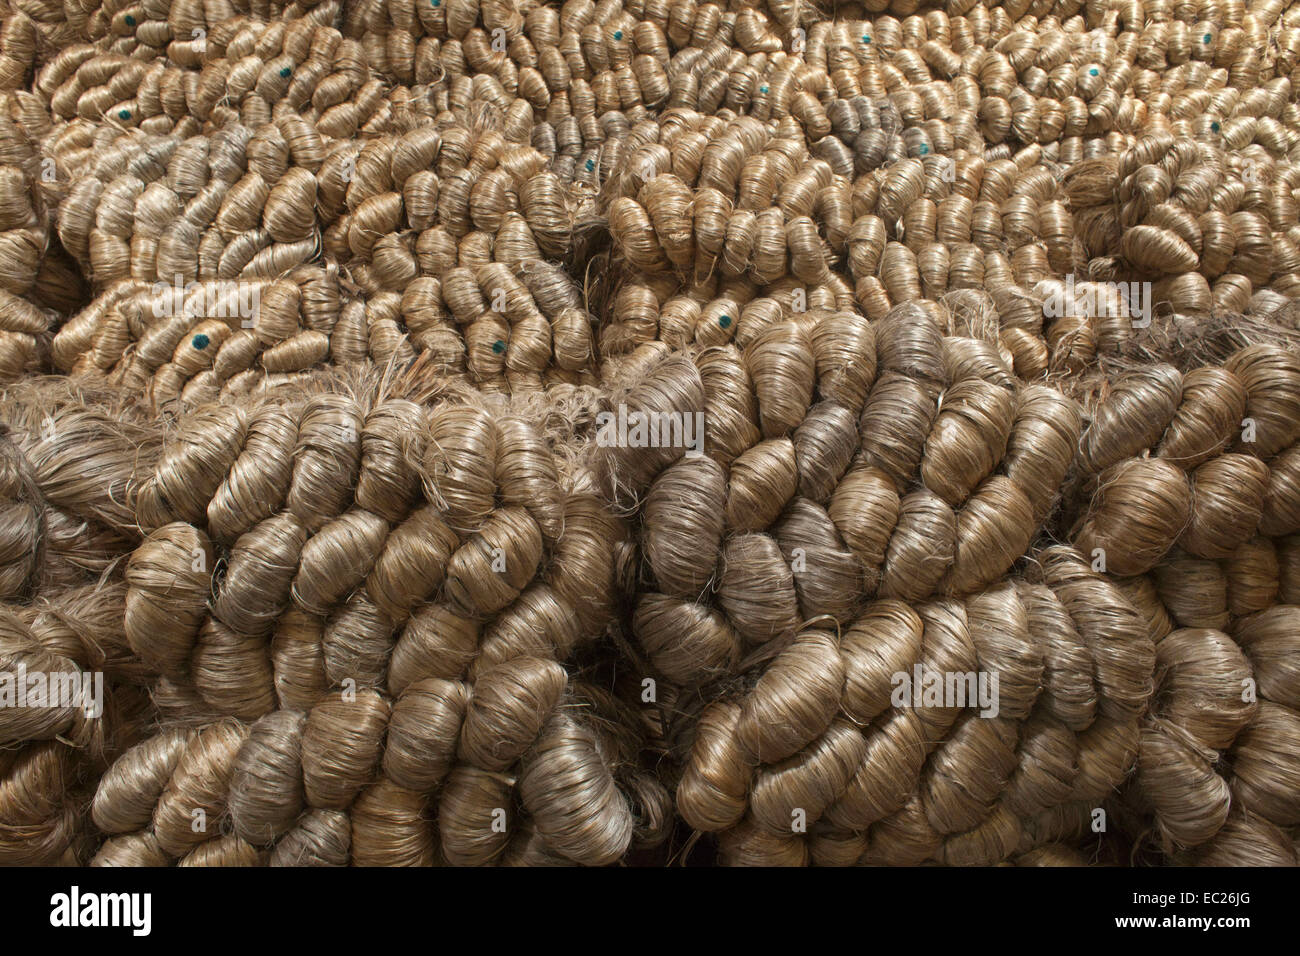 Munshigonj, Bangladesh. 8th Dec, 2014. Bangladeshi labor working inside jute godown in Munshigonj outskirts of Dhaka.Bangladesh is the world's largest producer of jute, a fibrous substance used in making burlap, sacks, mats, rope and twine, and carpet backing.Jute is a vital sector from economical, agricultural, industrial, and commercial point.of view in Bangladesh. Once upon a time jute was called the ''˜Golden Fibre' of.Bangladesh. But due to continuous loss every year, the present and future prosperity.and growth of this industry is in a vulnerable condition. There are different cause Stock Photo